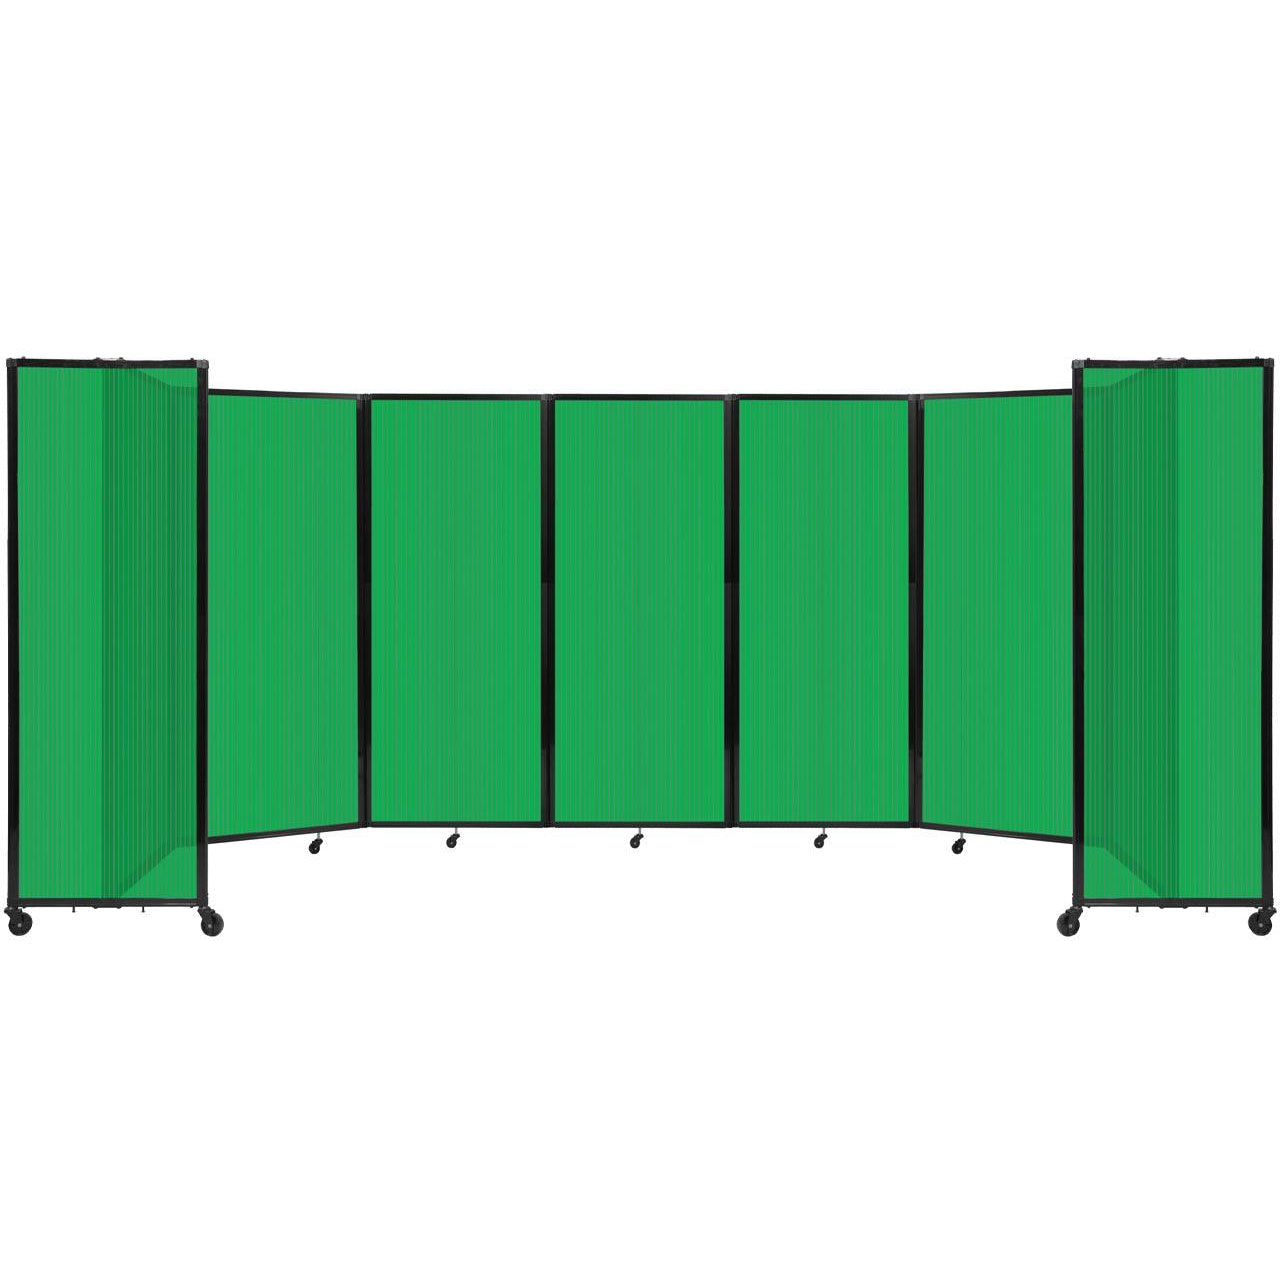 Room Divider 360° Folding Portable Partition with Fluted Polycarbonate Panels, 19' 6" W x 6' H